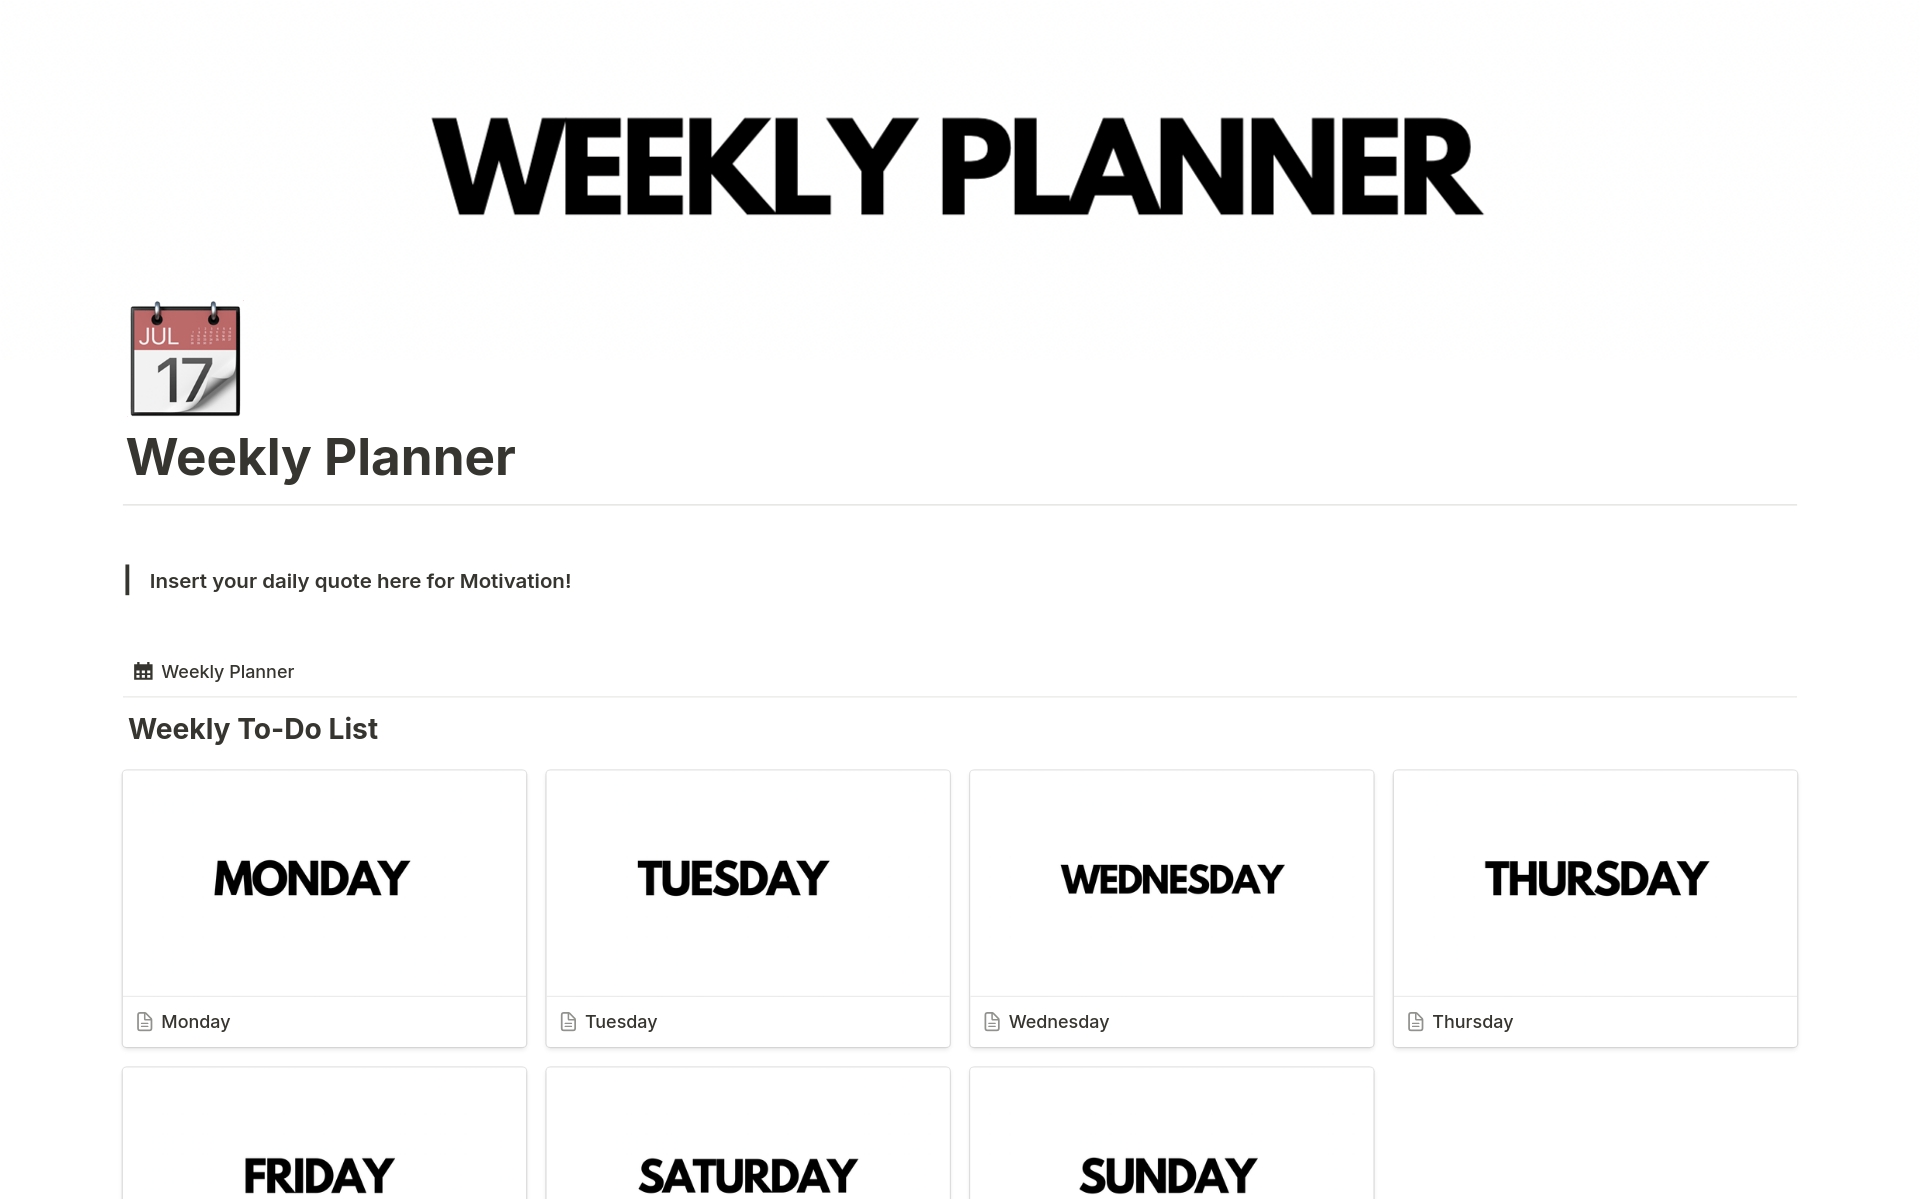 Plan, Track and keep yourself accountable with this Weekly Planner Notion Template